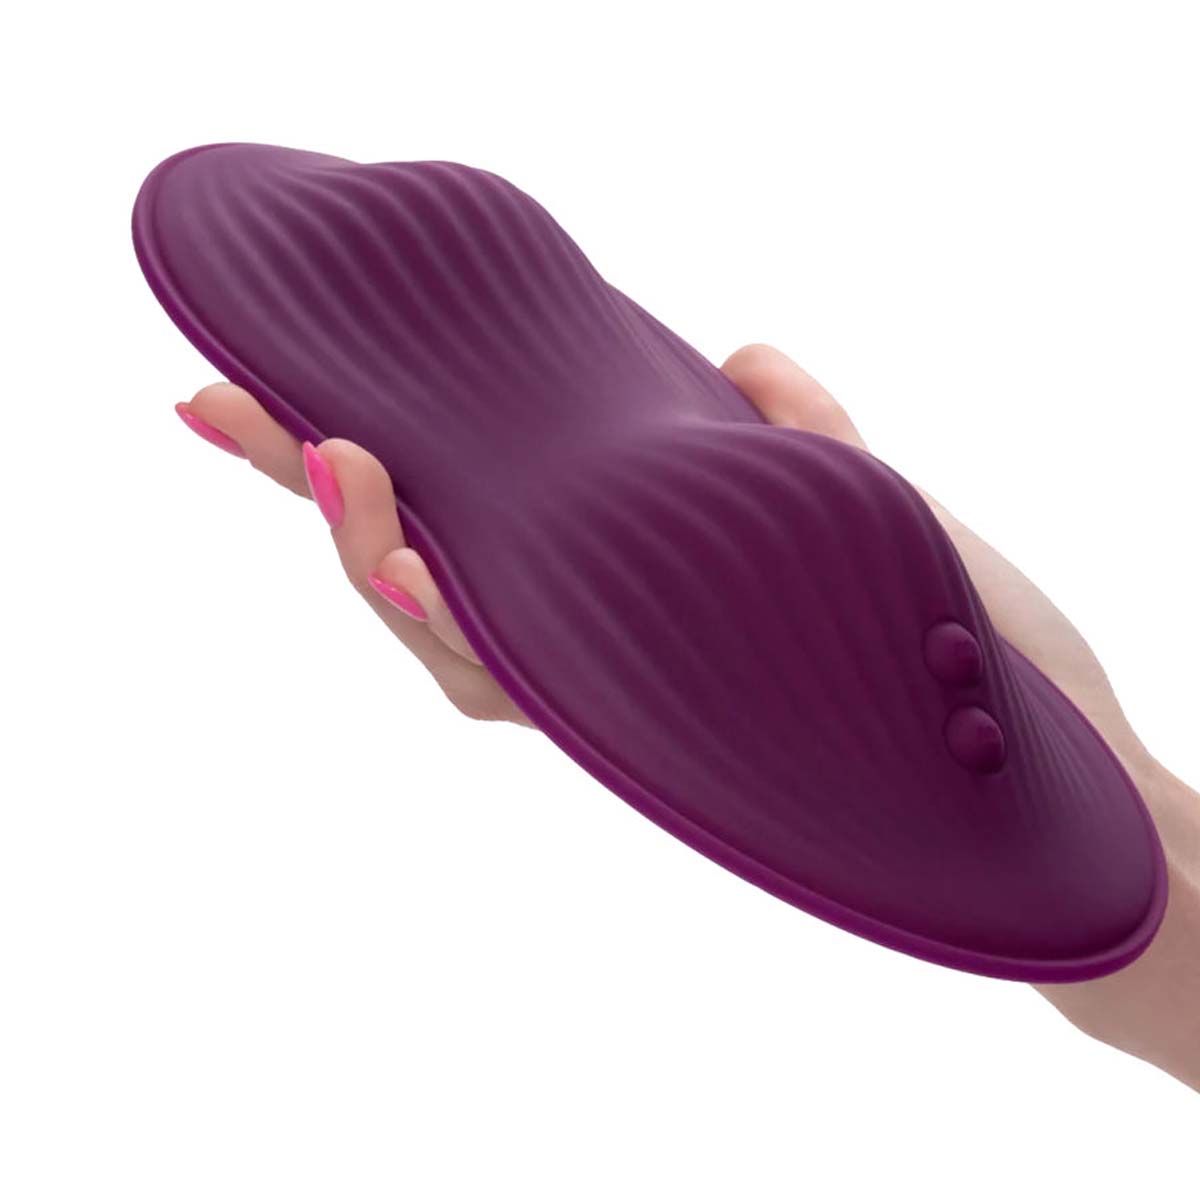 Hand holding a dark purple textured silicone vibrating pad with two control buttons Nudie Co